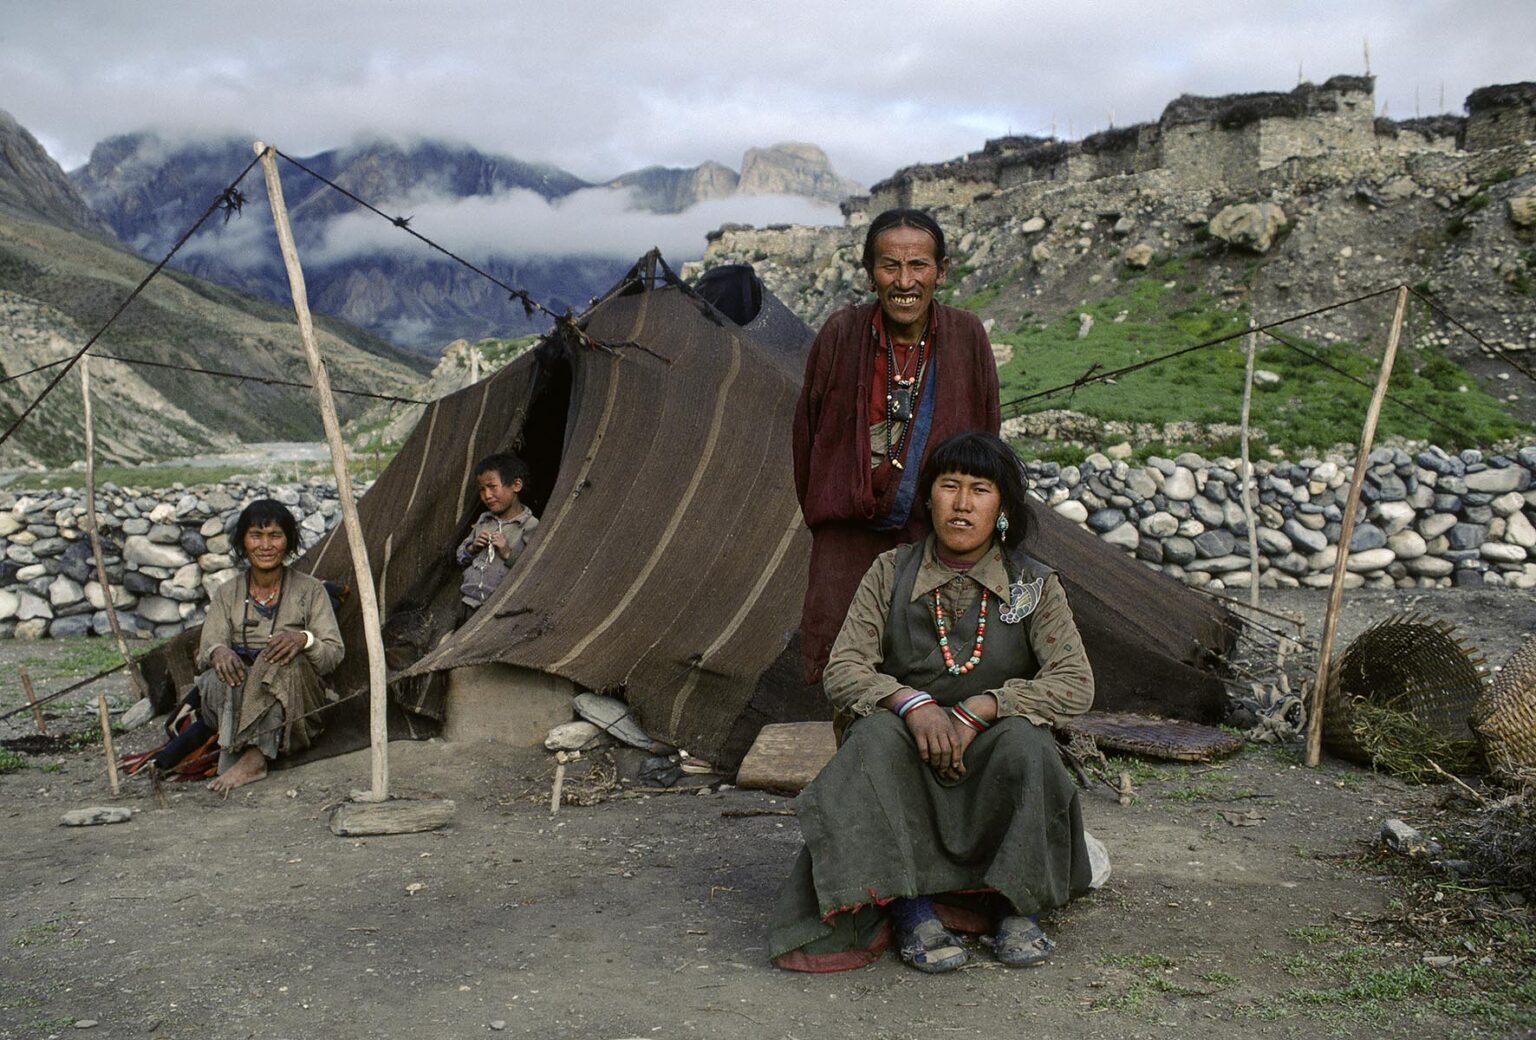 DOLPO FAMILY of the Amchi Lama with their TENT HOUSE in front of CHARKA VILLAGE - DOLPO DISTRICT, NEPAL